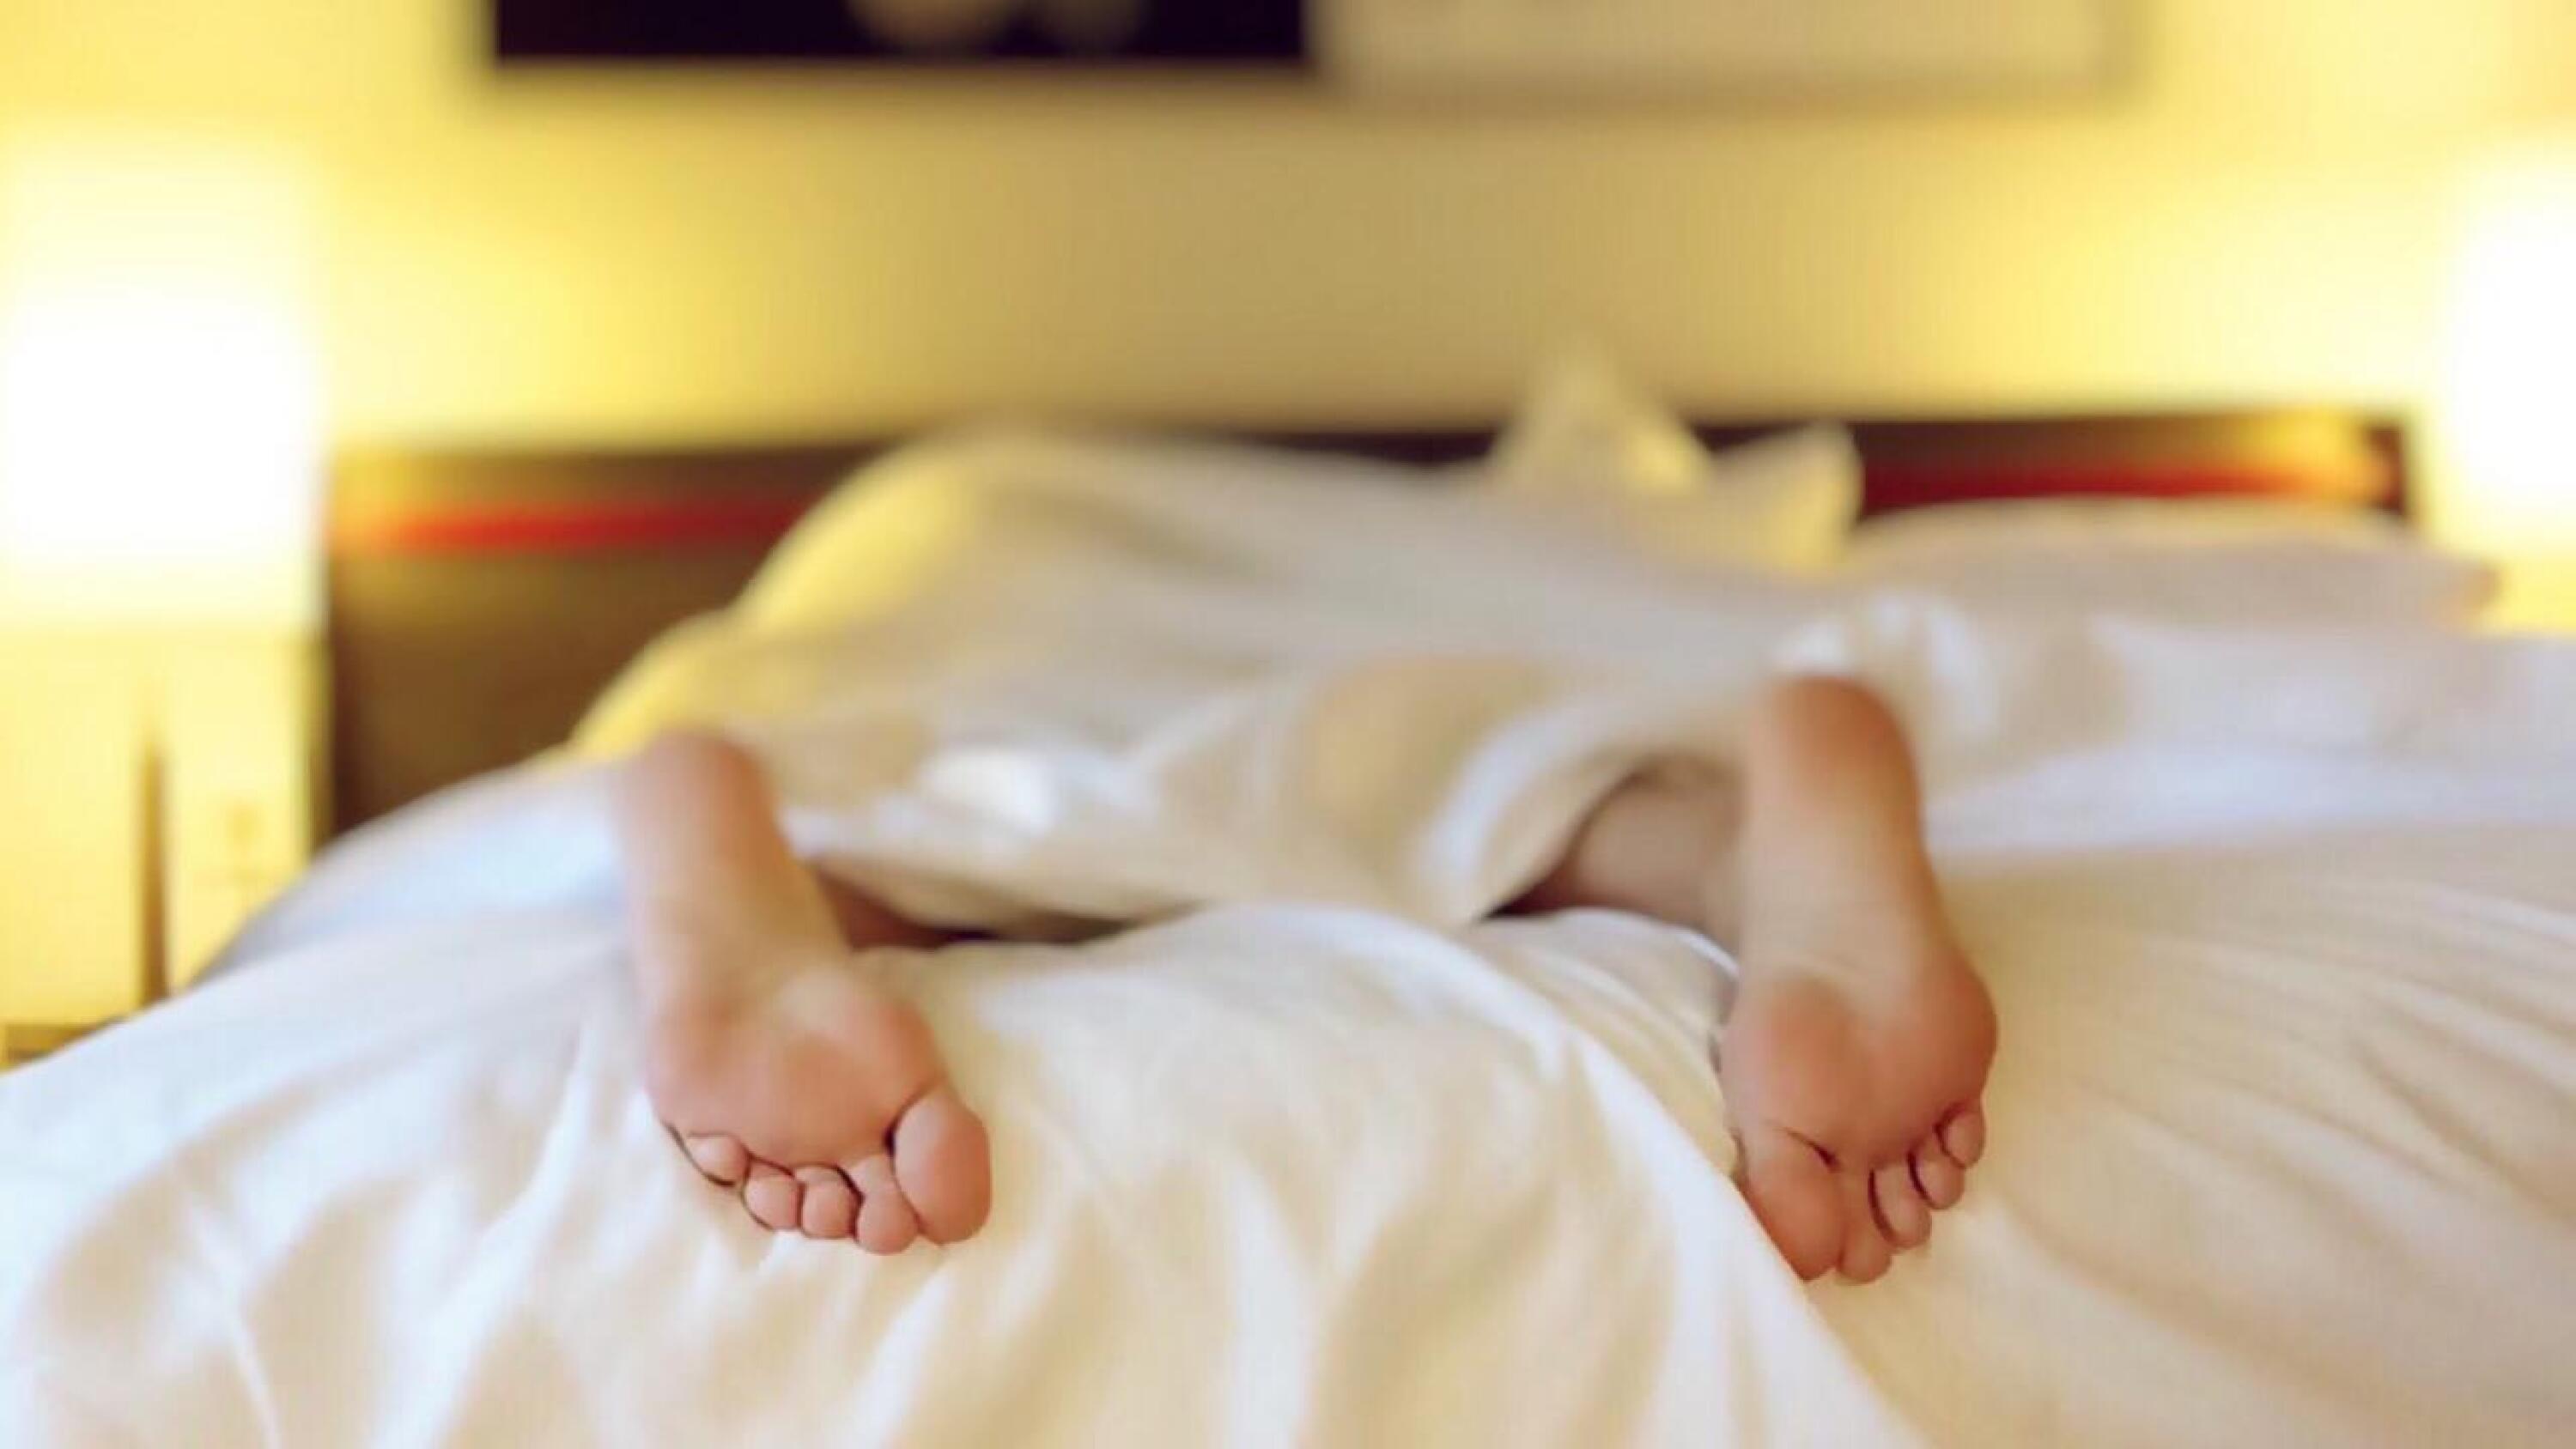 Picture of naked feet protruding from the sheets of a rumpled bed.